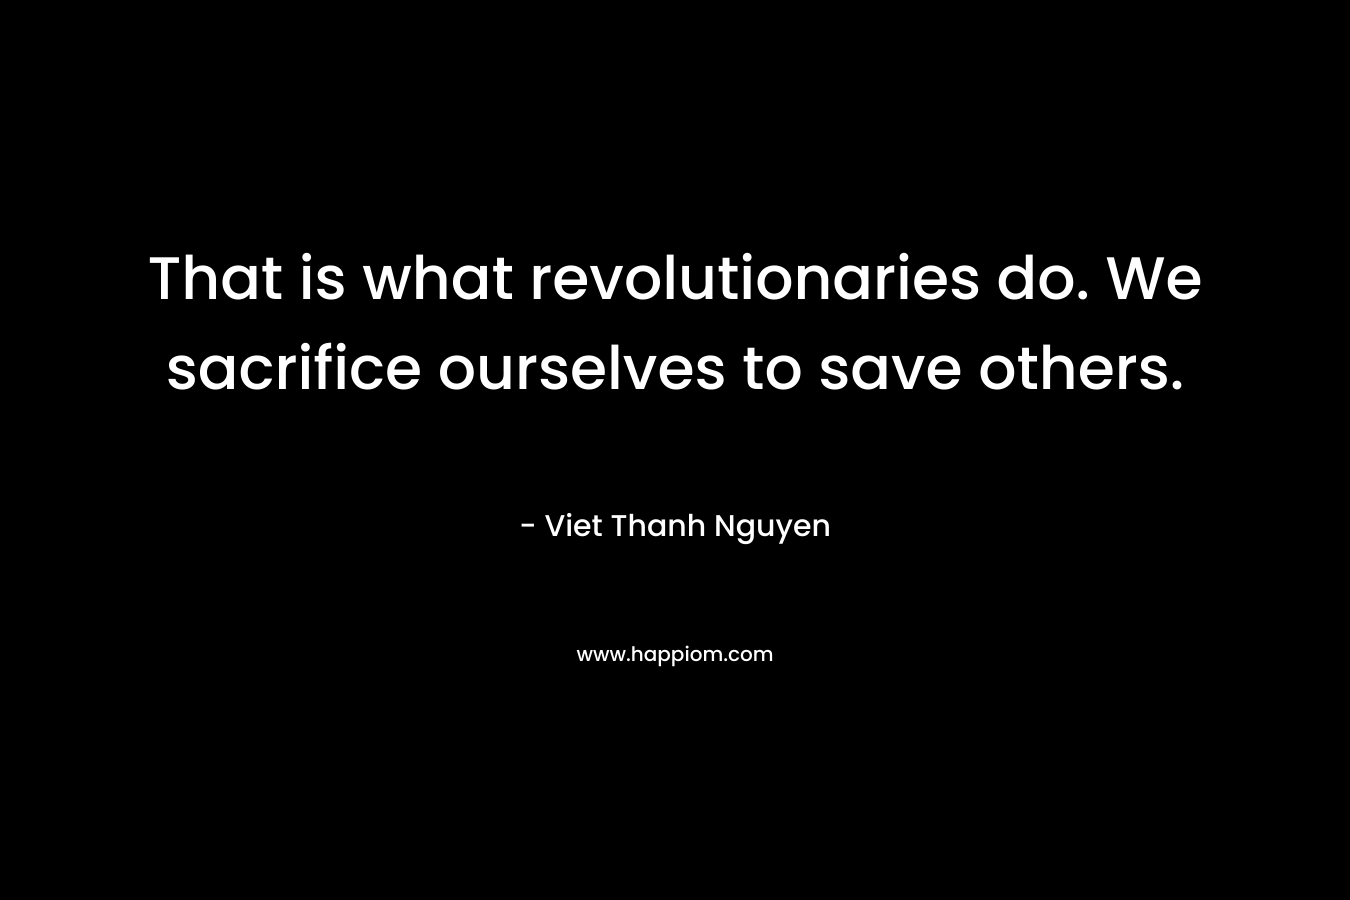 That is what revolutionaries do. We sacrifice ourselves to save others.